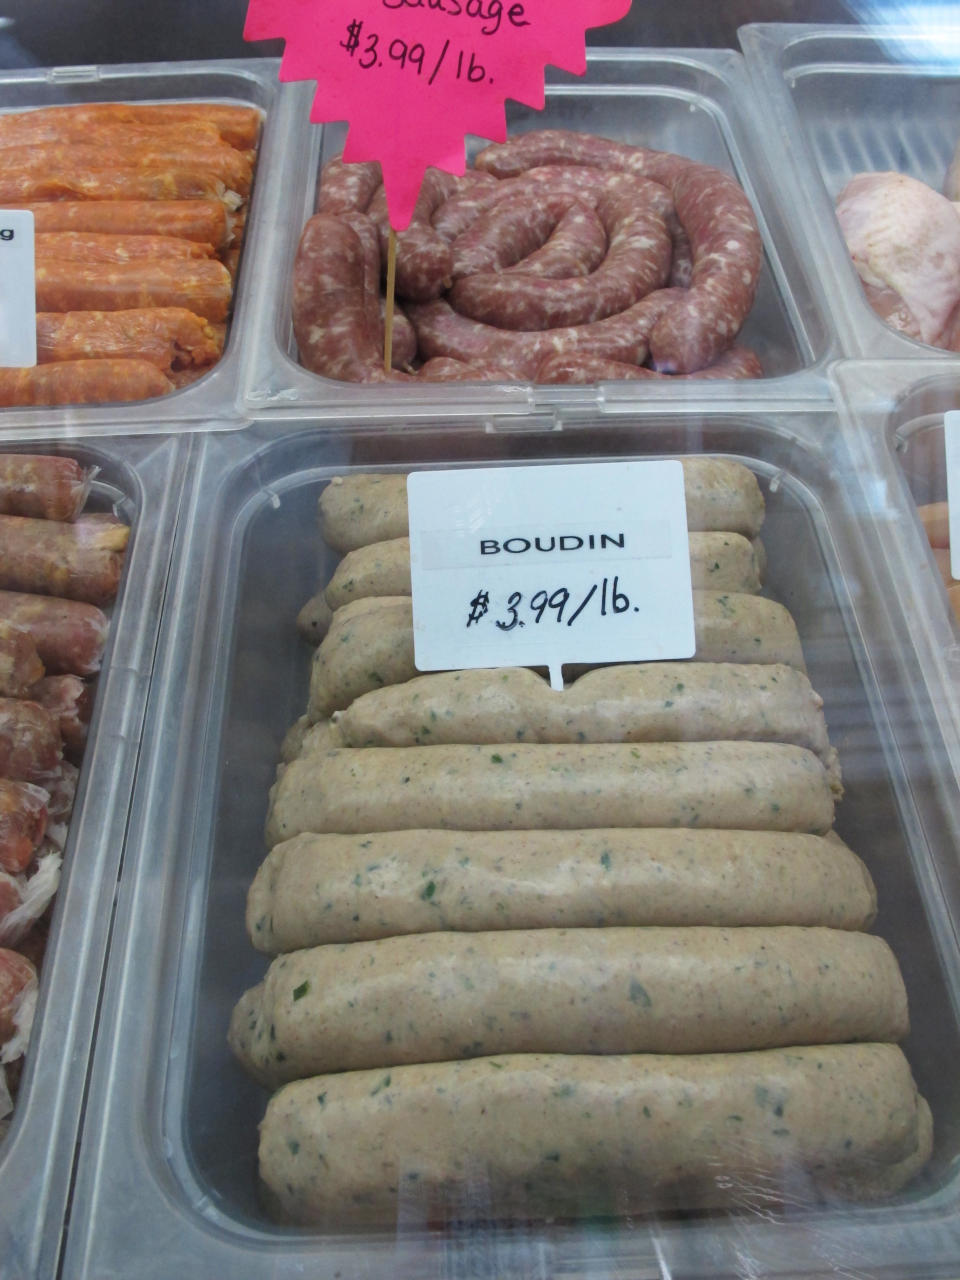 In this Monday, April 1, 2013 photo, Boudin, a pork and rice sausage popular in Louisiana, is seen in the cooler for sale at the Country Store market where it was made in Pennsdale, Pa. An influx of workers from the South to fill jobs in the natural gas industry in north-central Pennsylvania has led area catering businesses, restaurants and grocery stores to offer more Southern cuisine like jambalaya and boudin. (AP Photo/Genaro C. Armas)